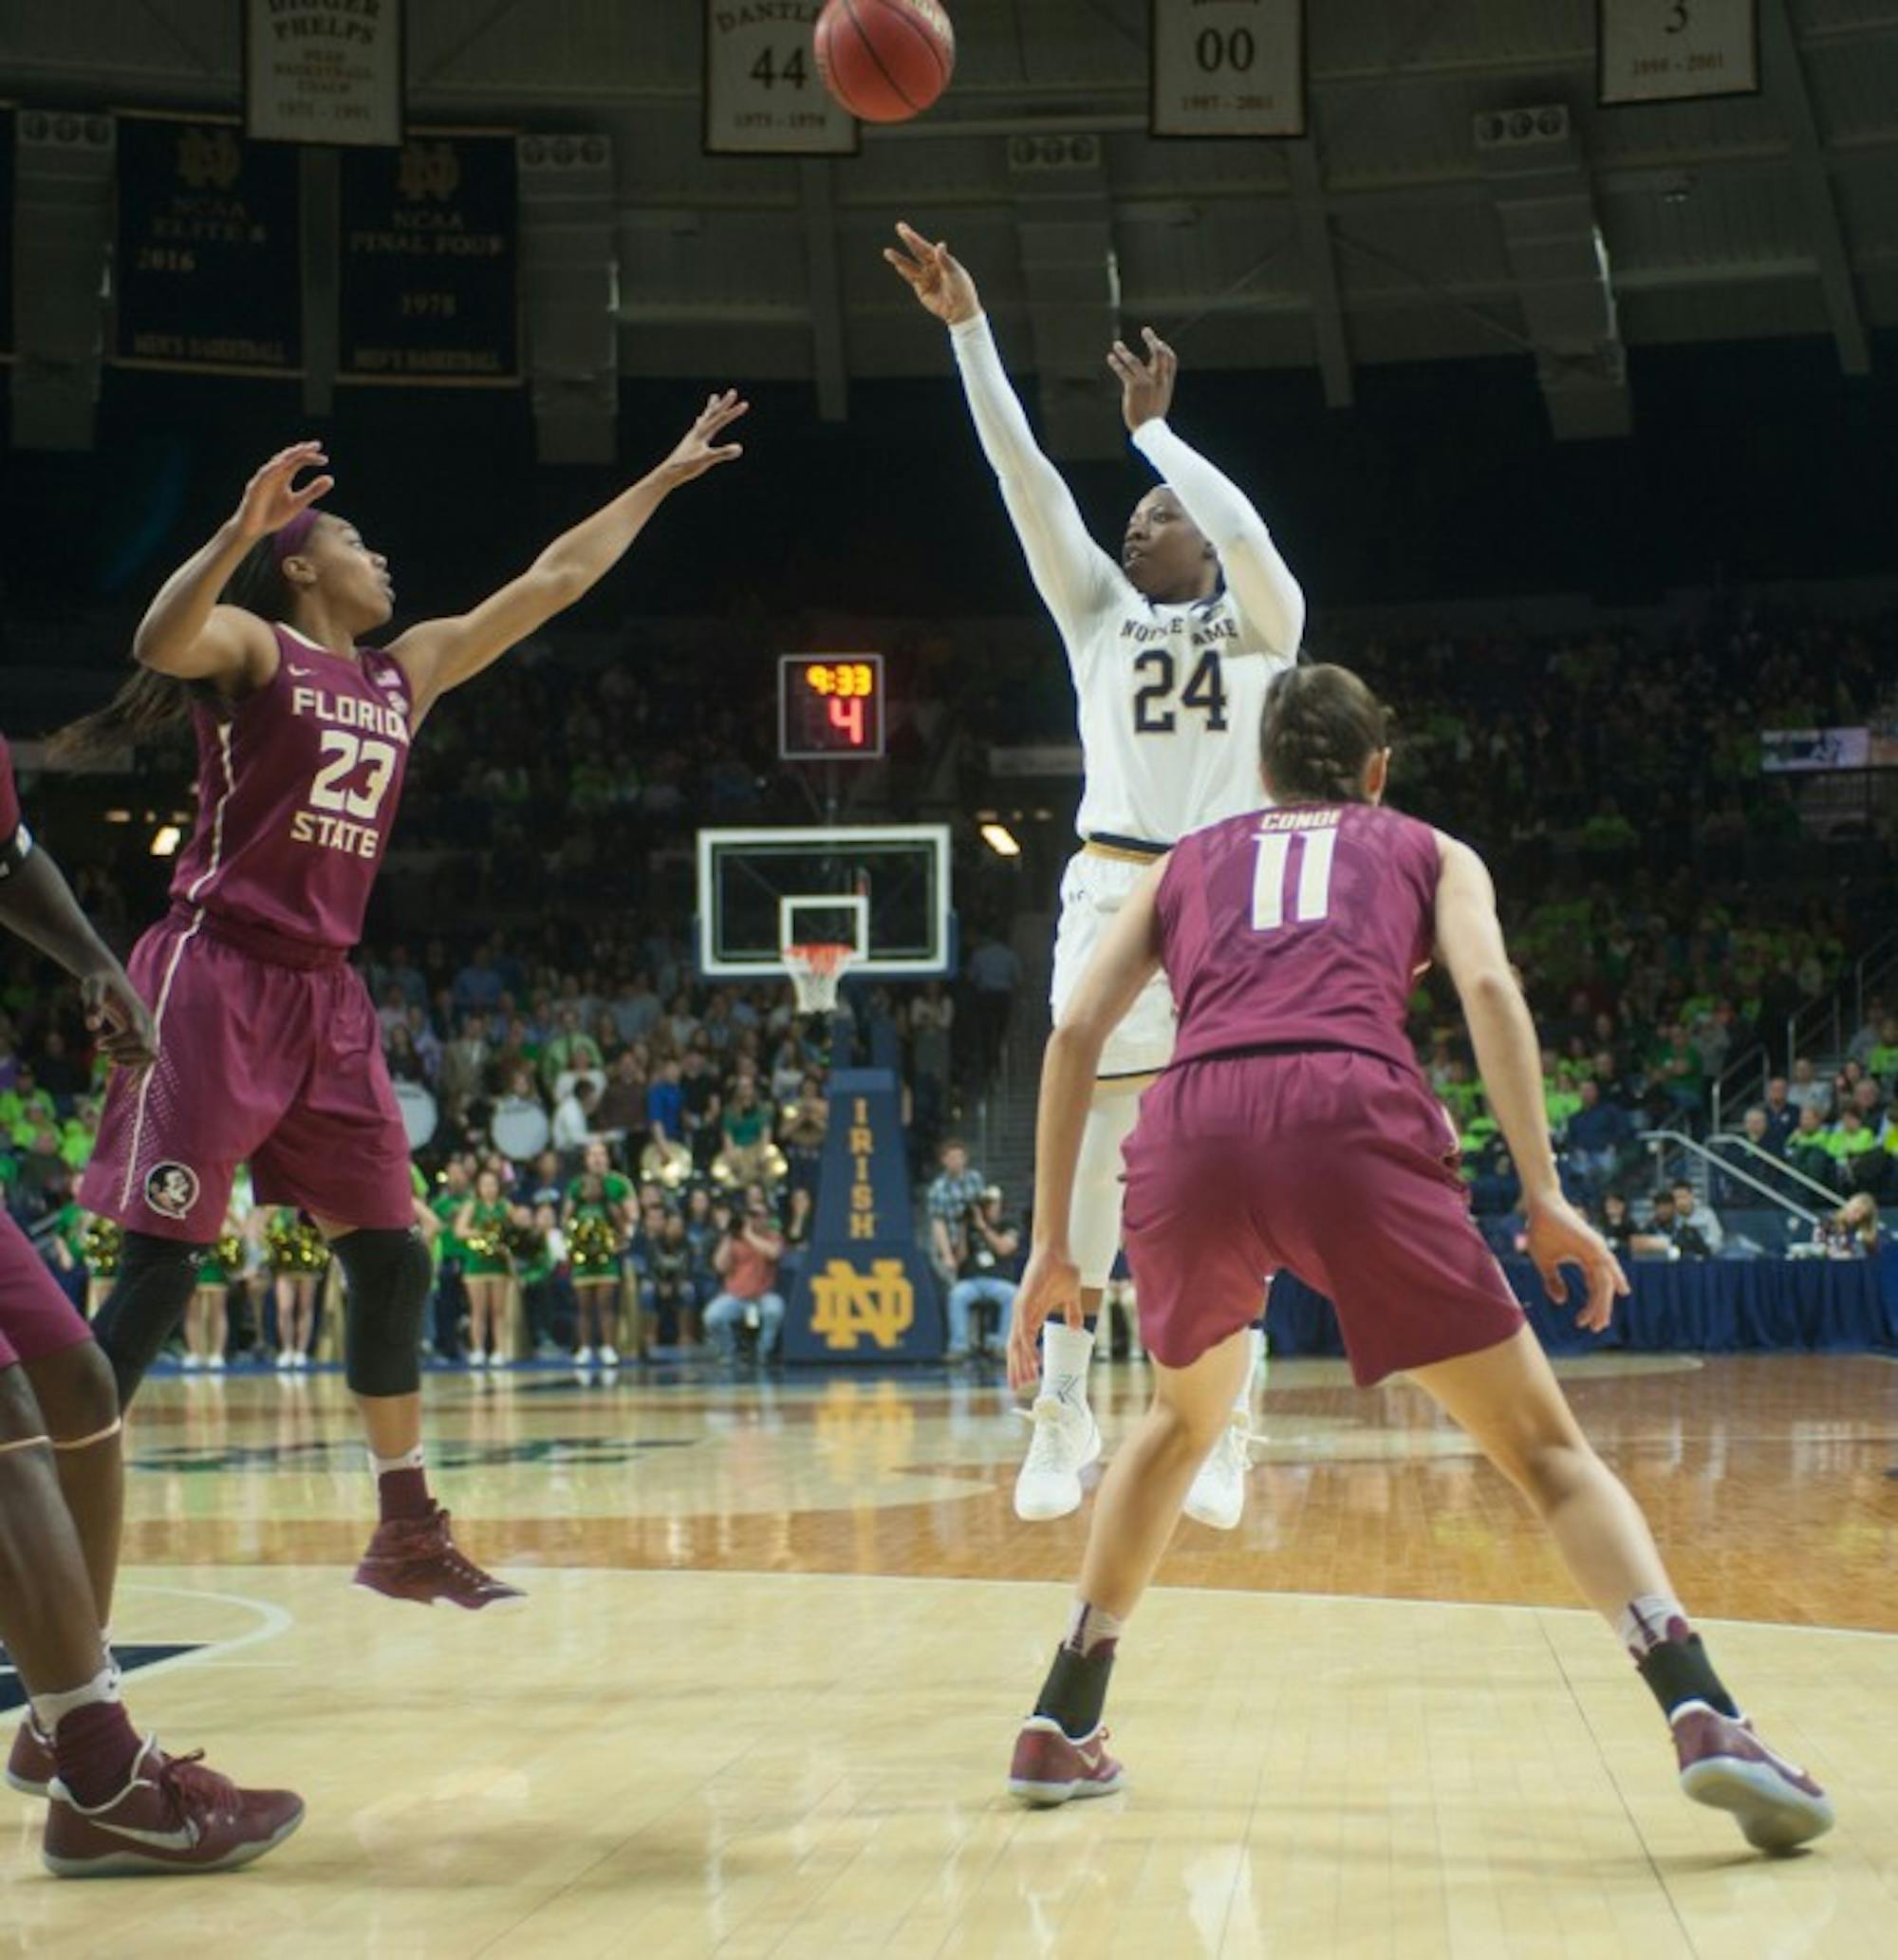 Irish sophomore guard Arike Ogunbowale takes a shot in Notre Dame’s 79-61 victory over Florida State on Feb. 26 at Purcell Pavilion.